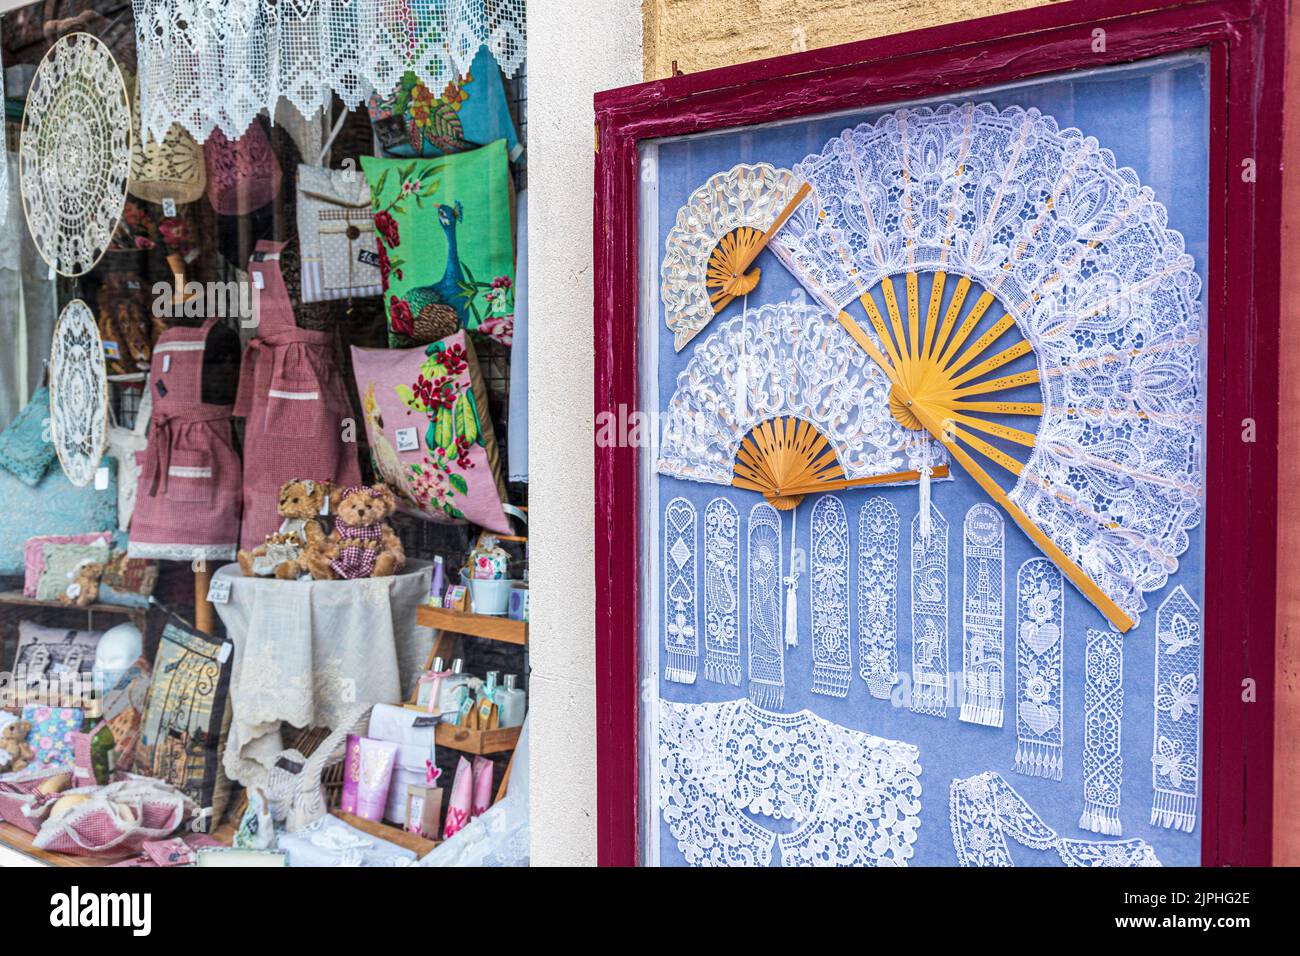 Belgian lace on display outside a shop in Bruges, Belgium Stock Photo